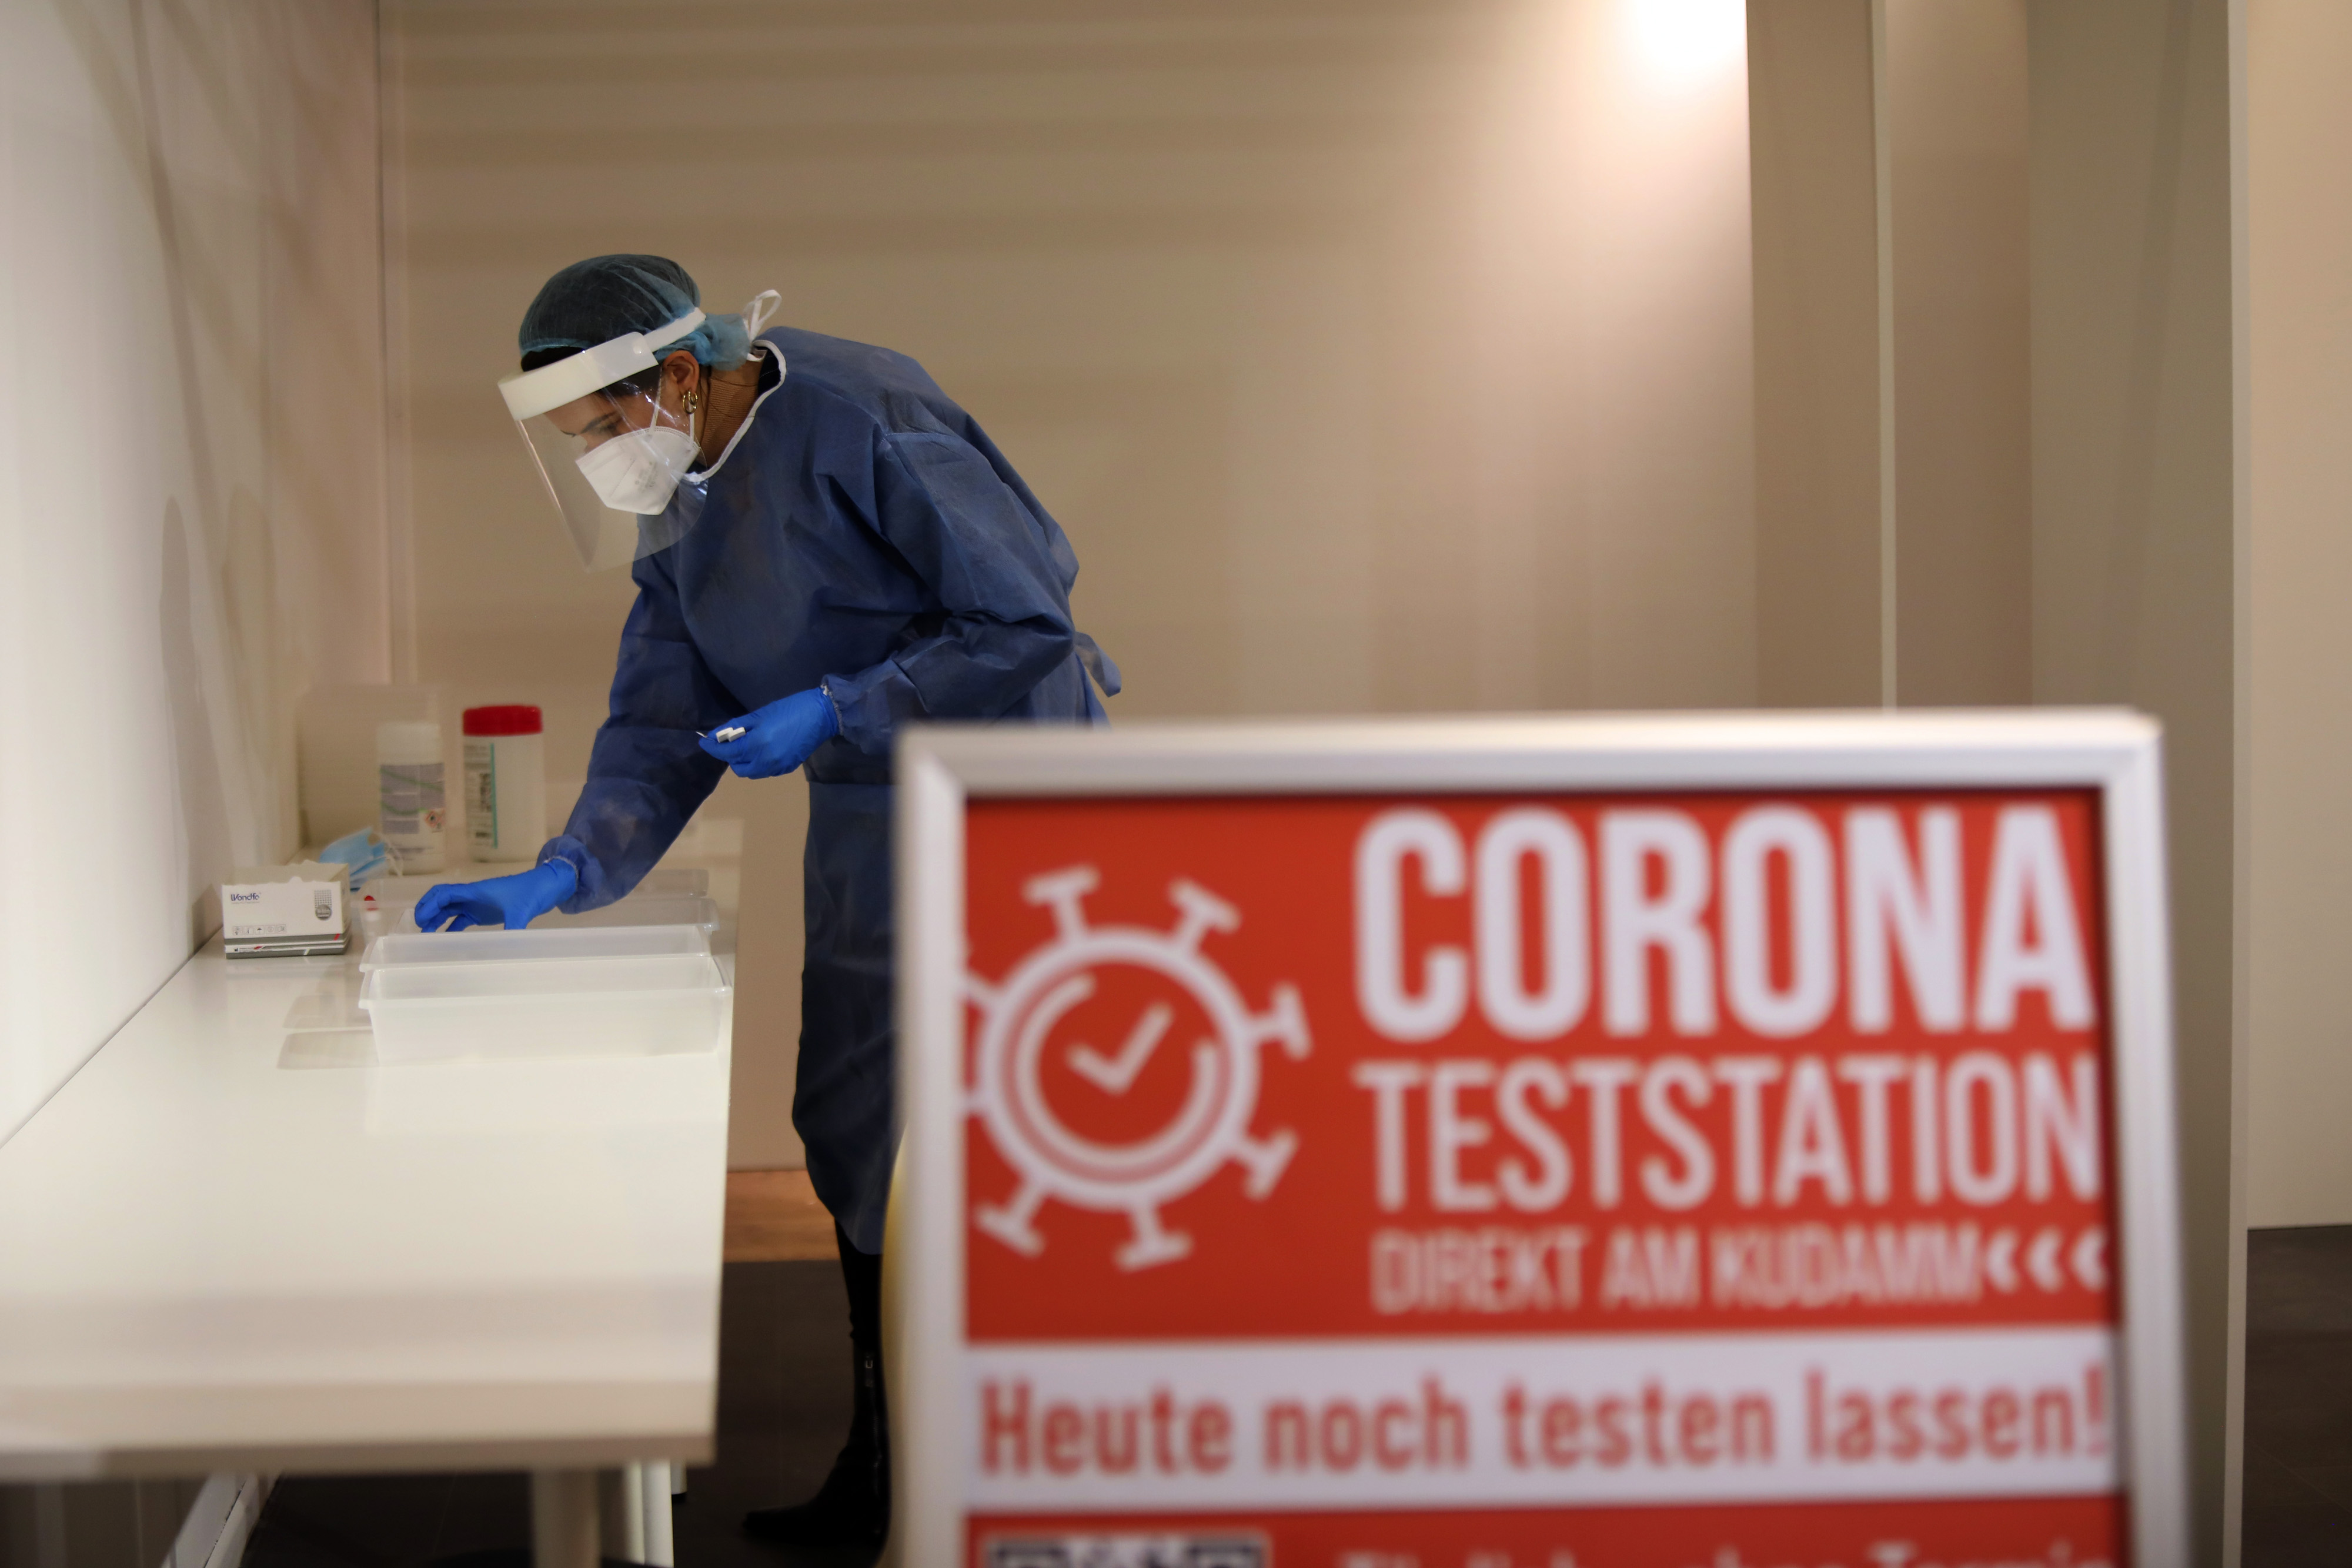 Germany is discussing financing for virus tests and other measures.